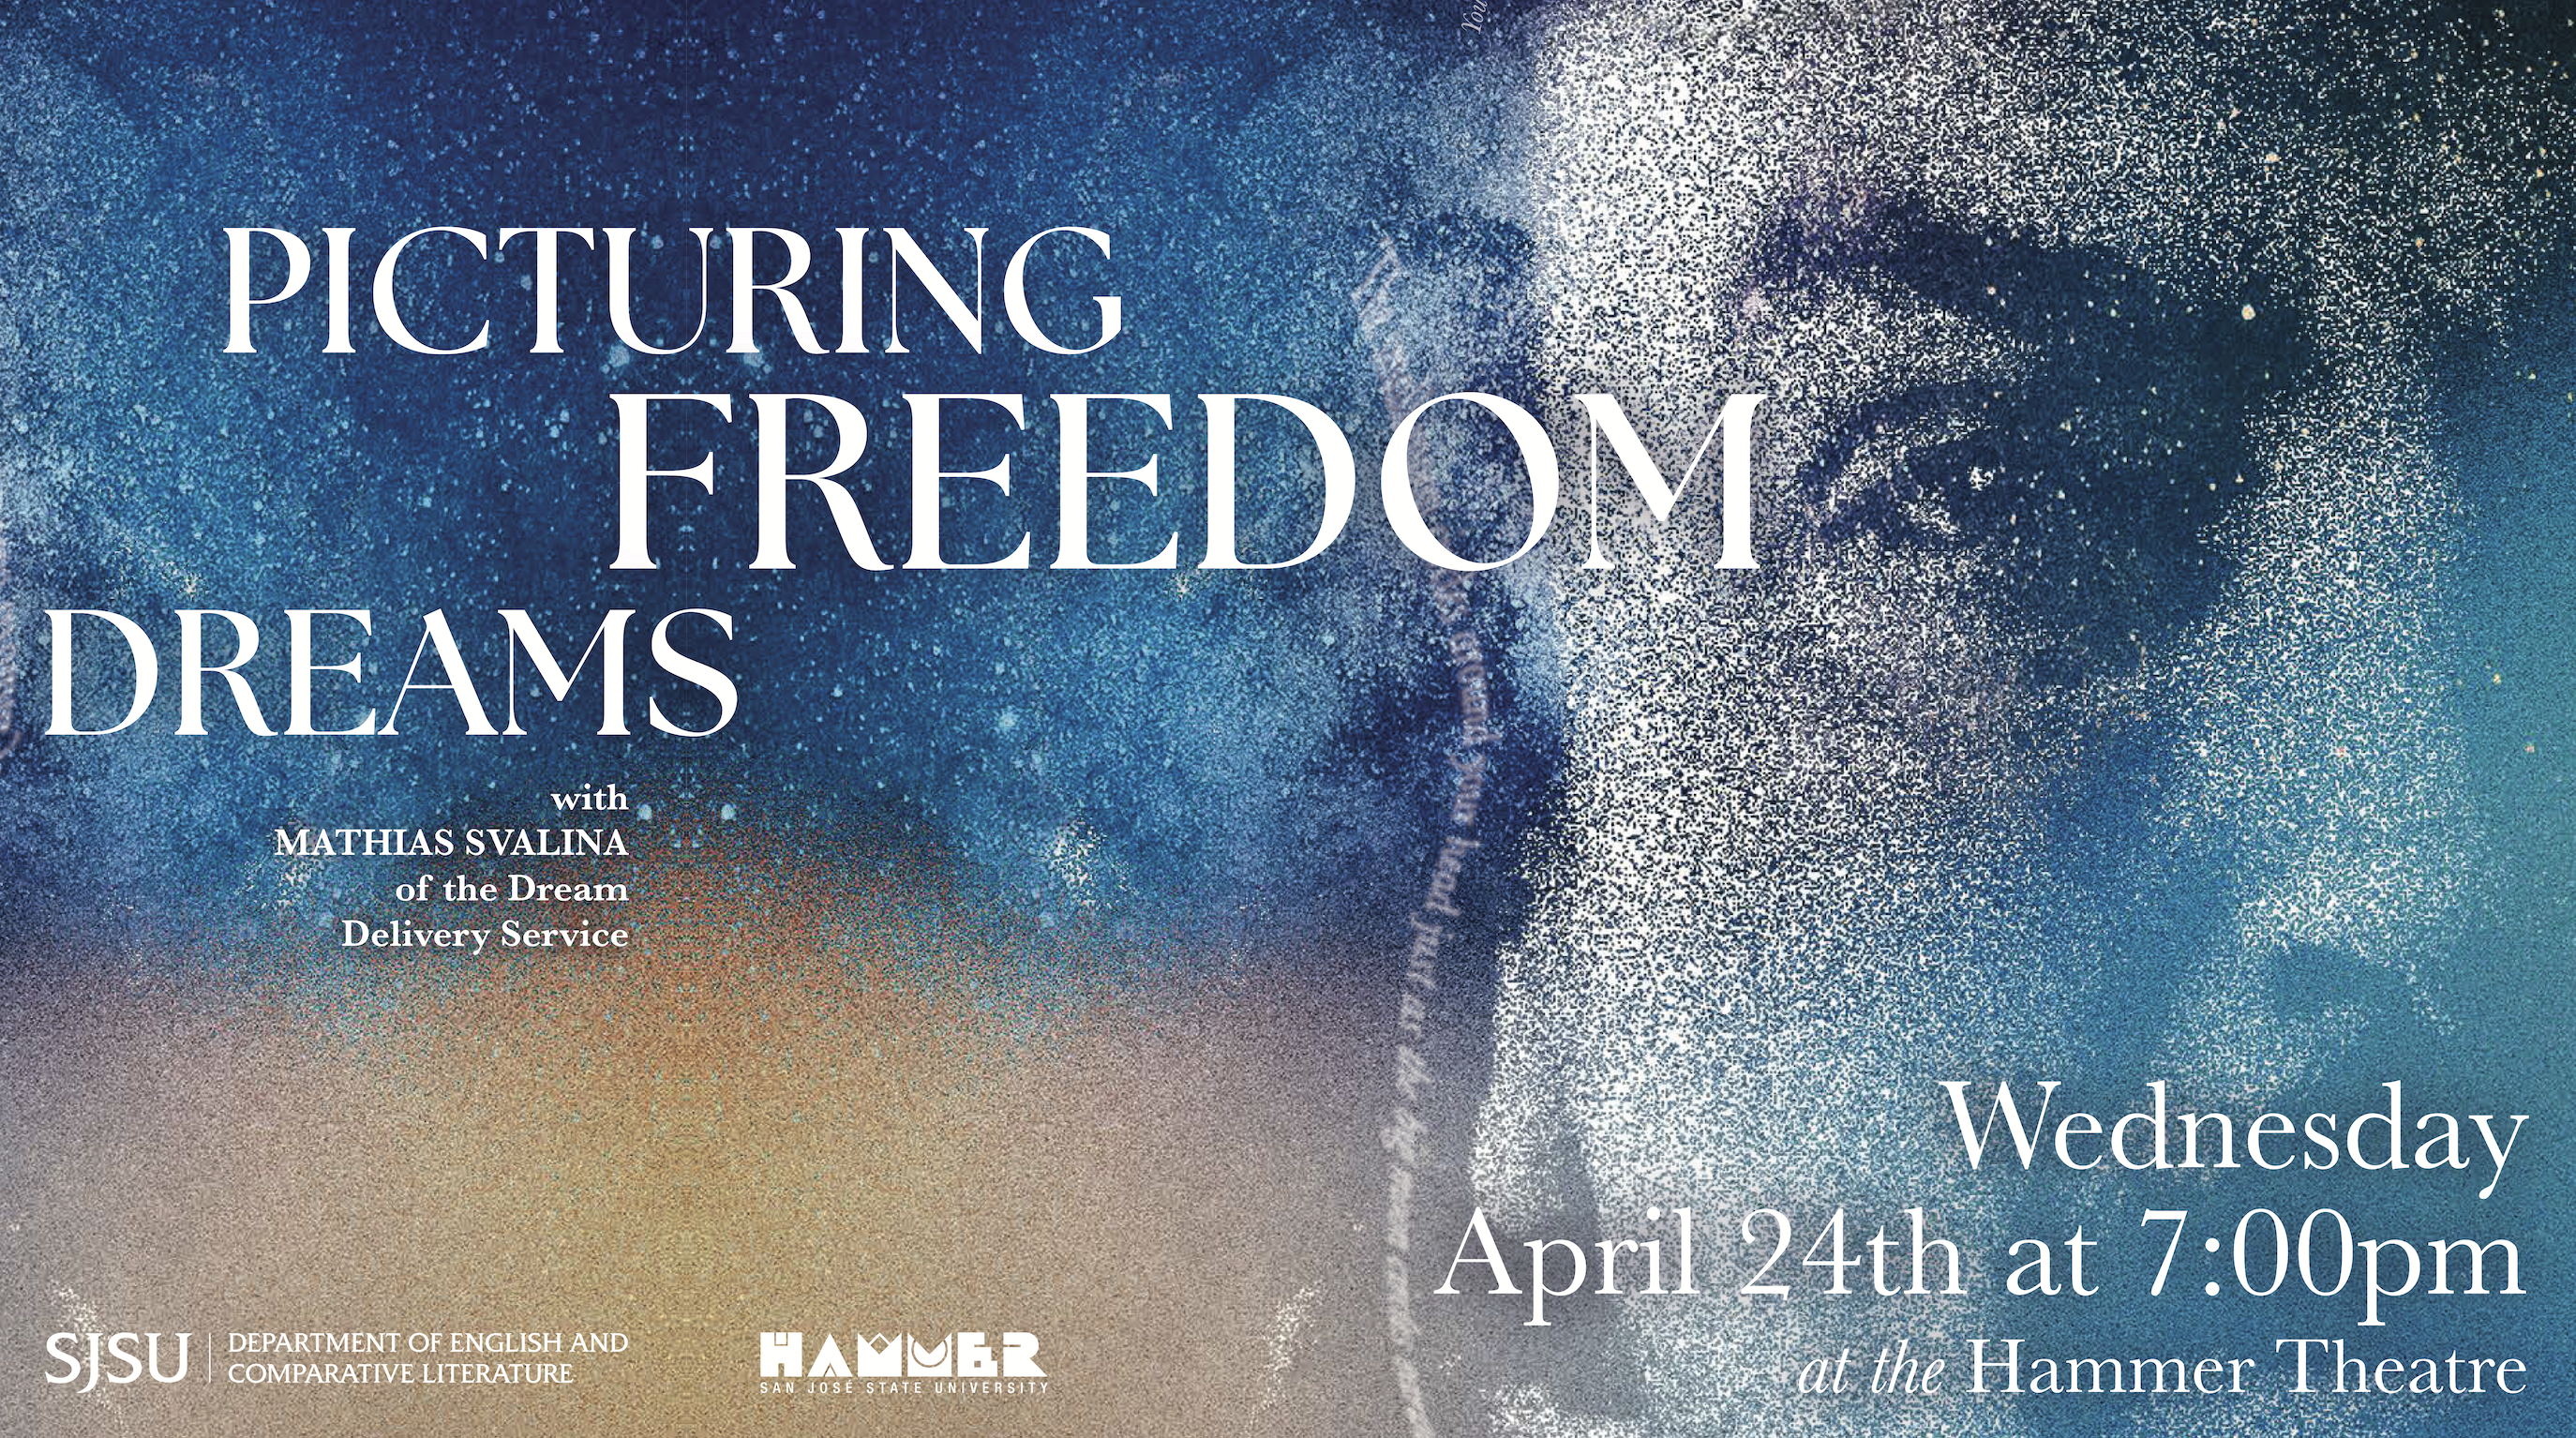  SJSU Department of English & Comparative Literature presents Picturing Freedom Dreams: Poetry & Comics